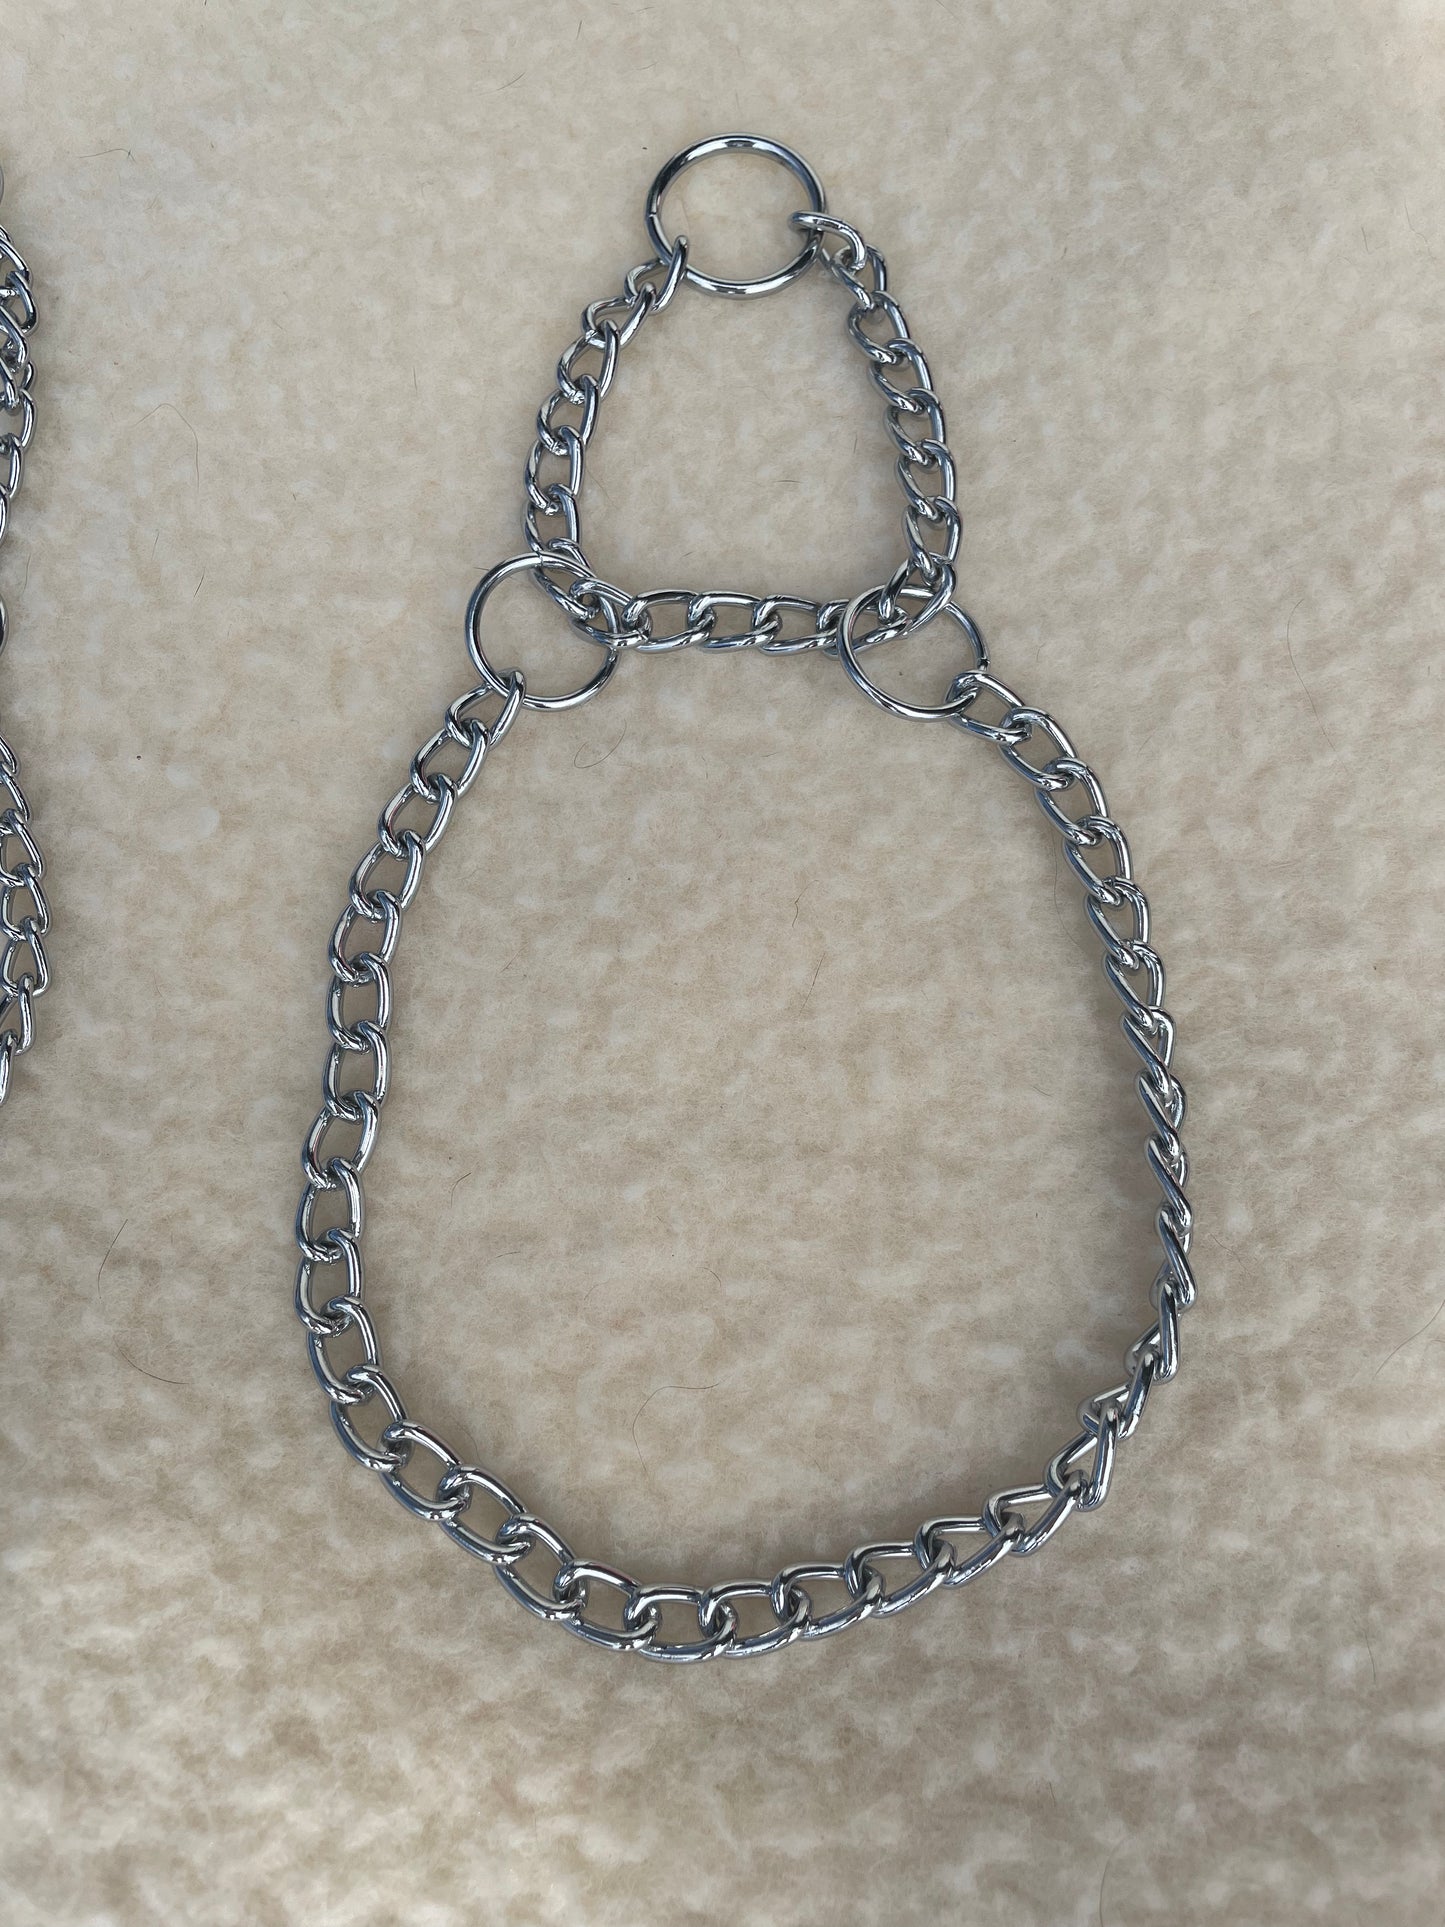 Martingdale Style Chain Collar